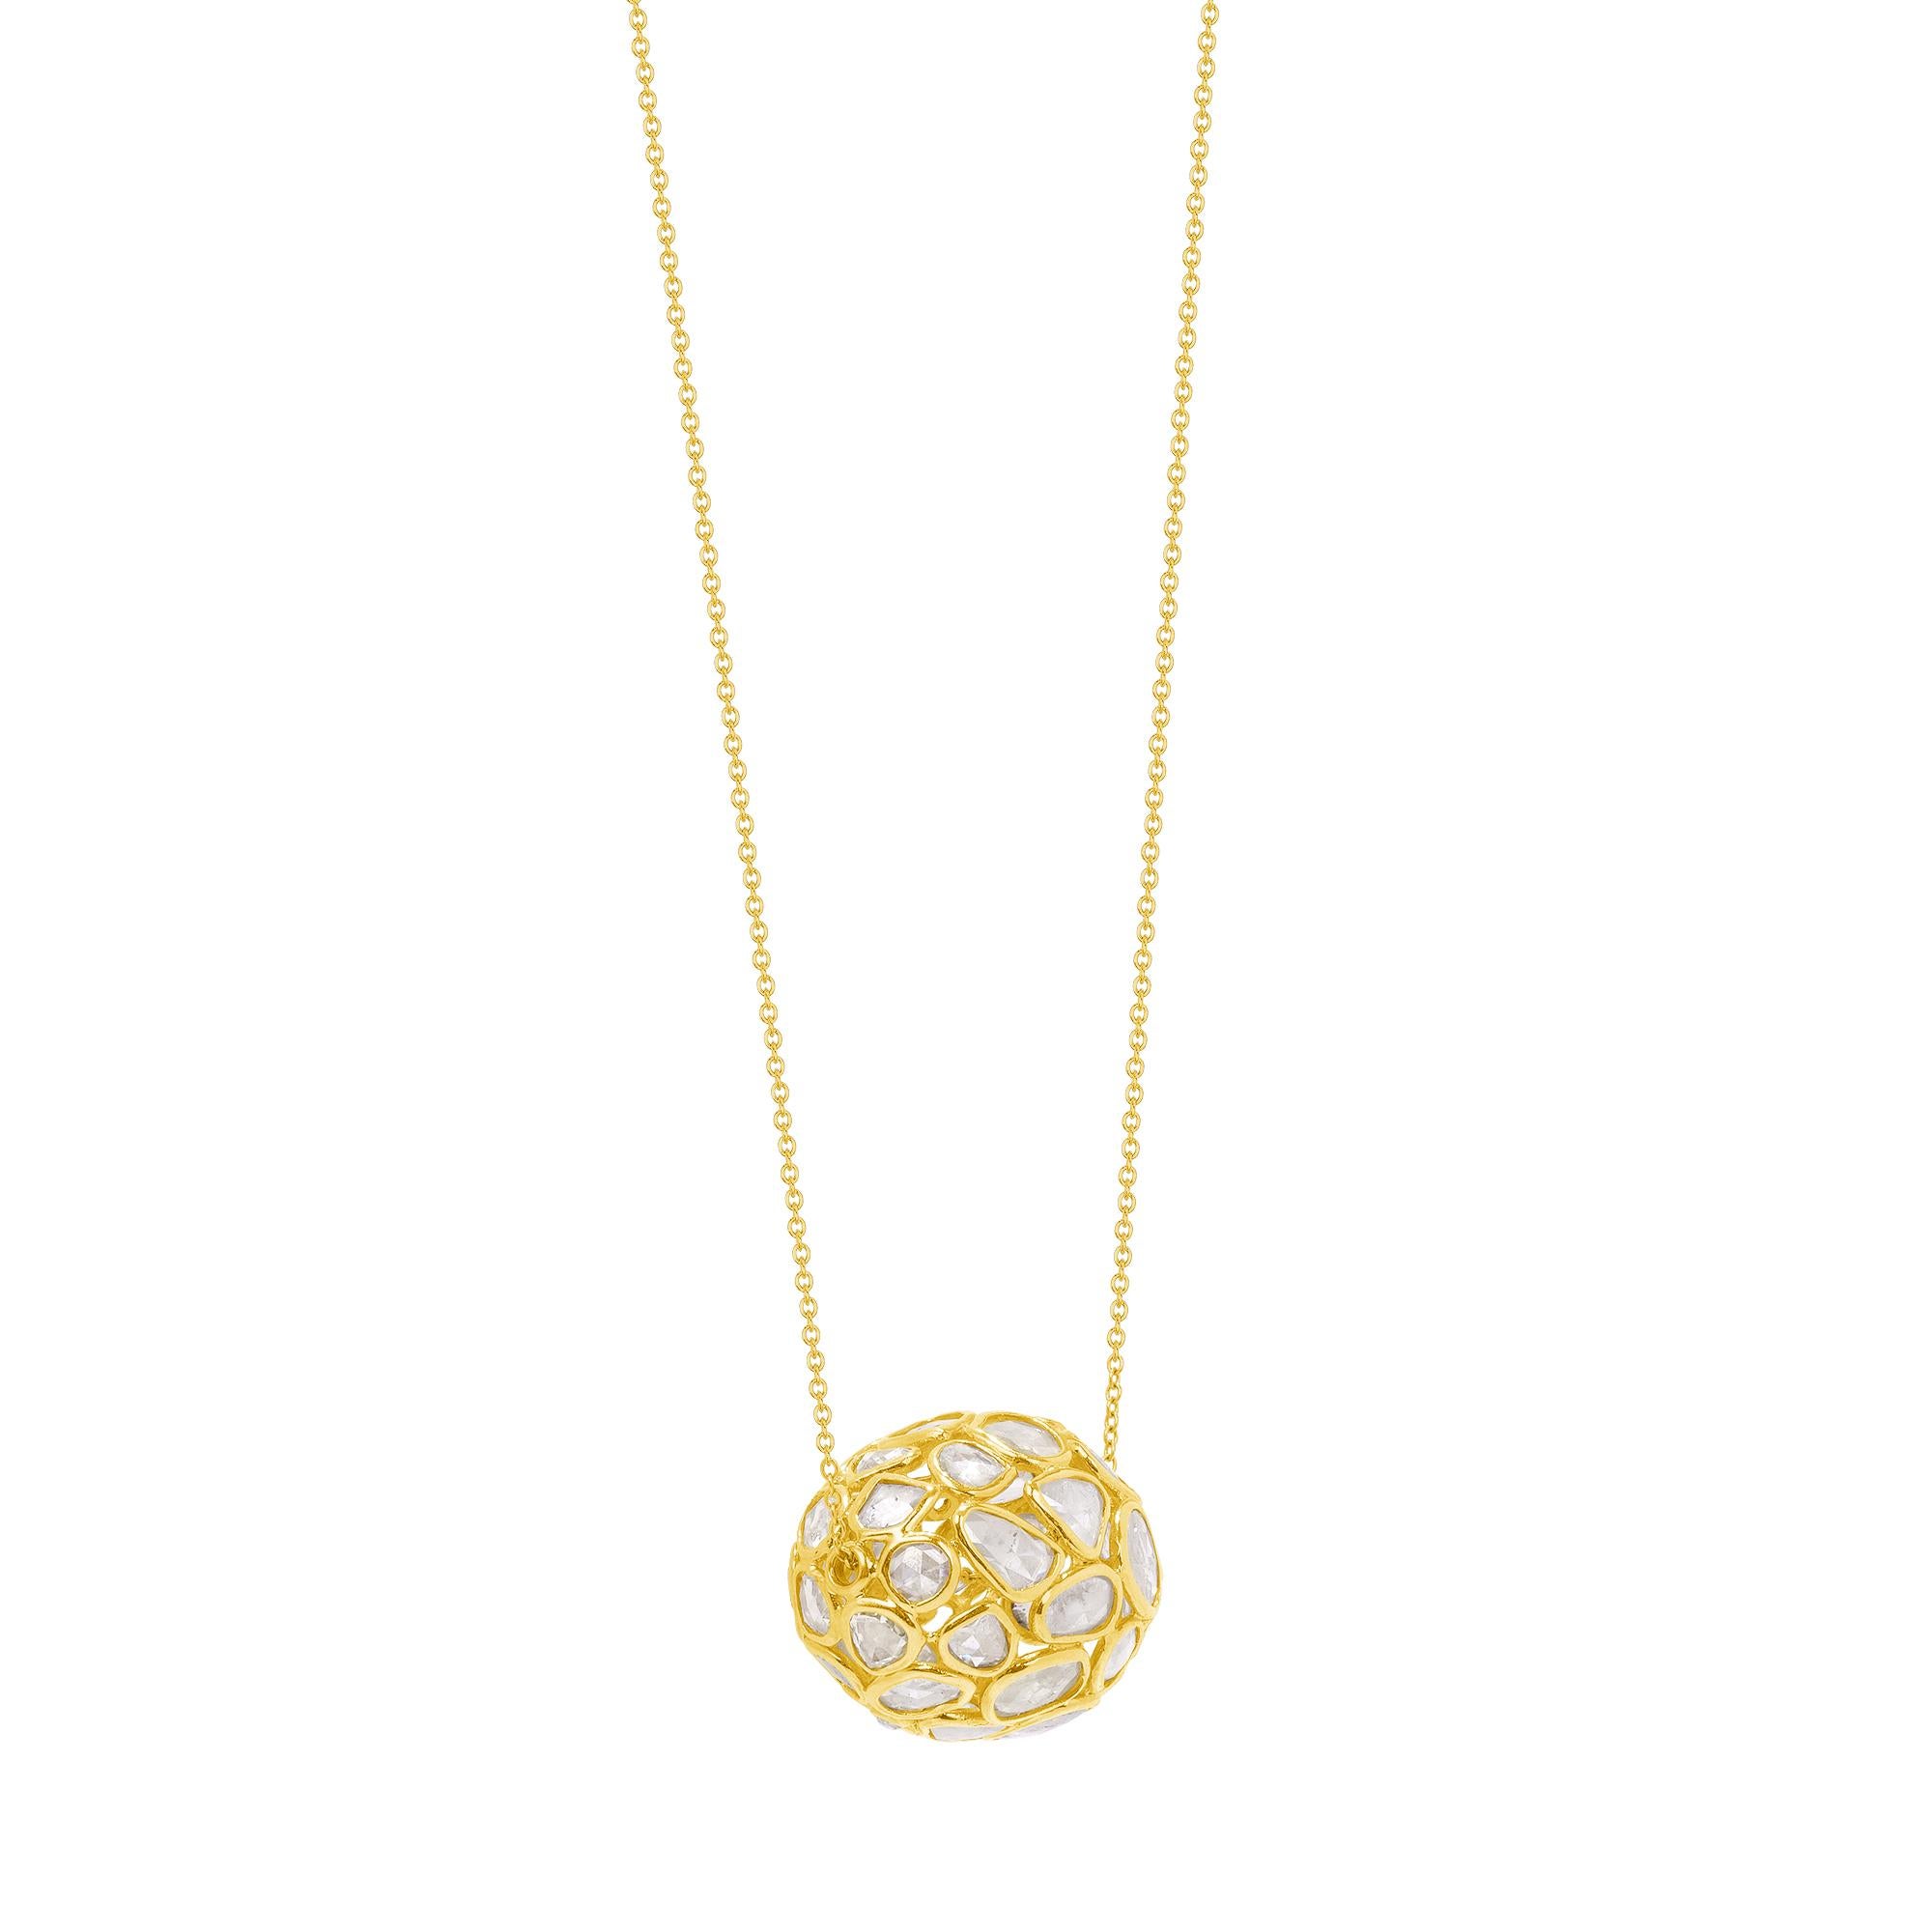 Artist 8.39 Carat Total Weight Diamond Yellow Gold Pendant Necklace, in Stock For Sale